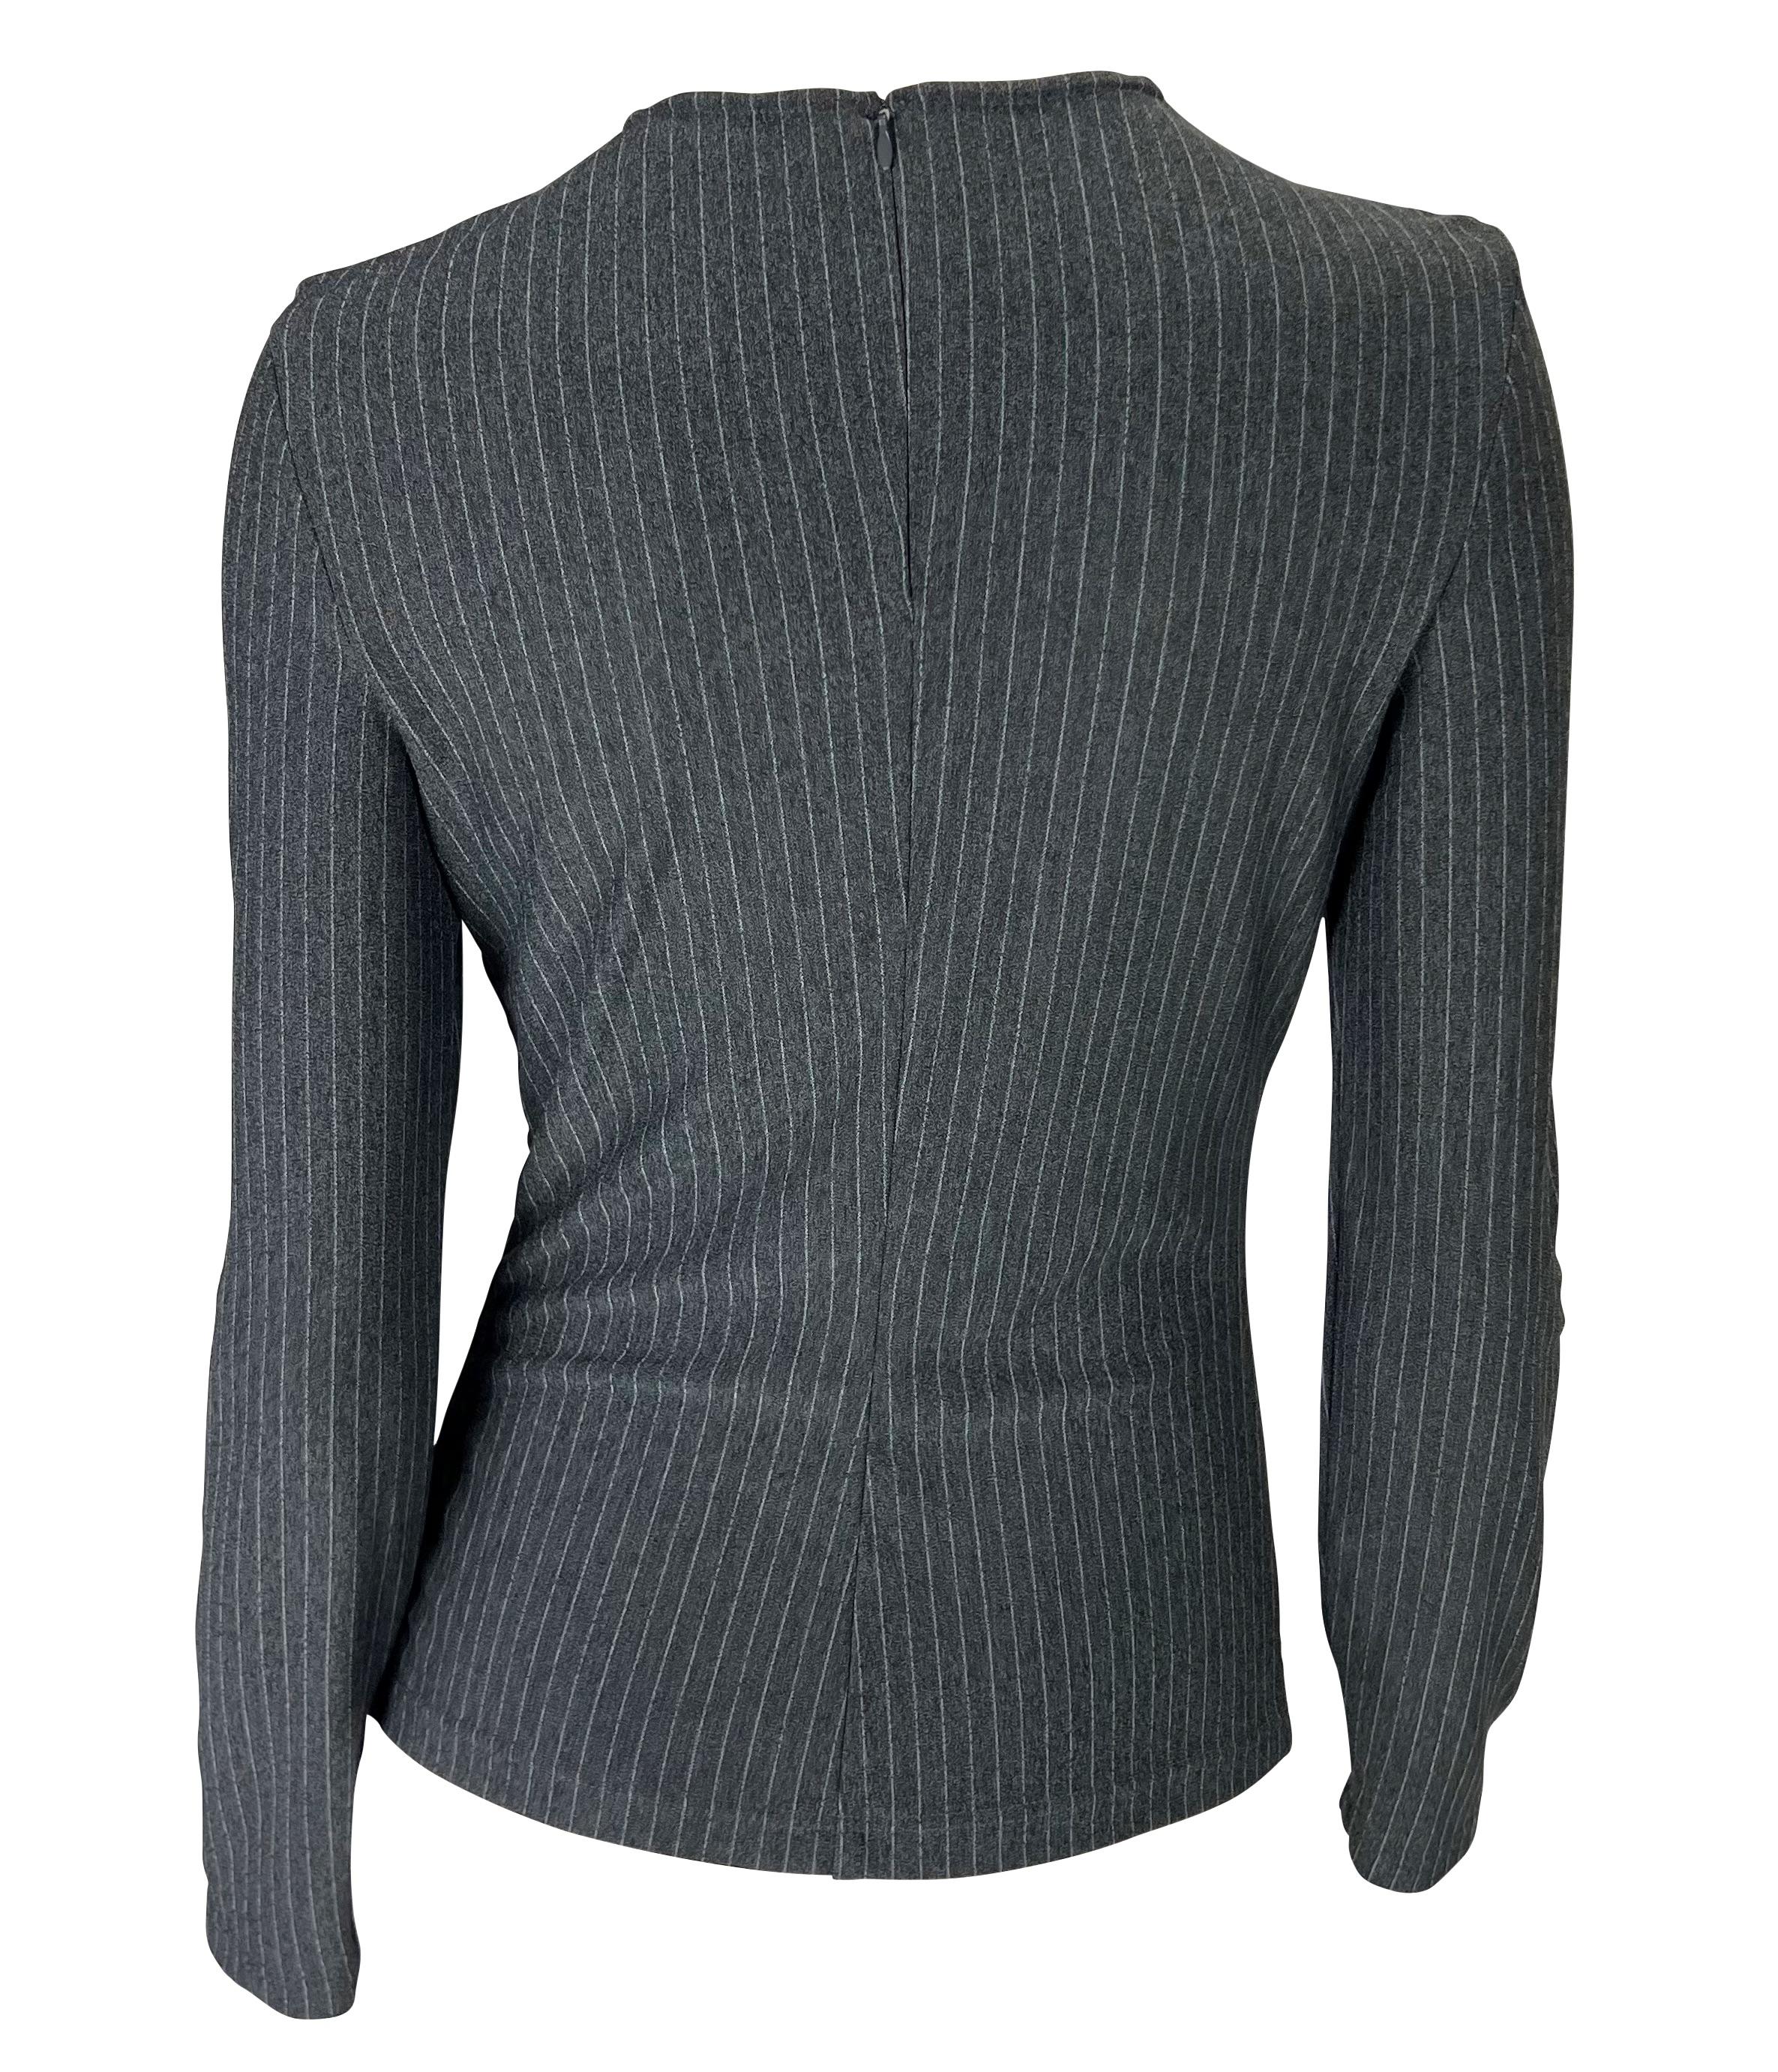 Women's 1990s Gianni Versace Couture Grey Pinstripe Stretch Medusa Blouse For Sale